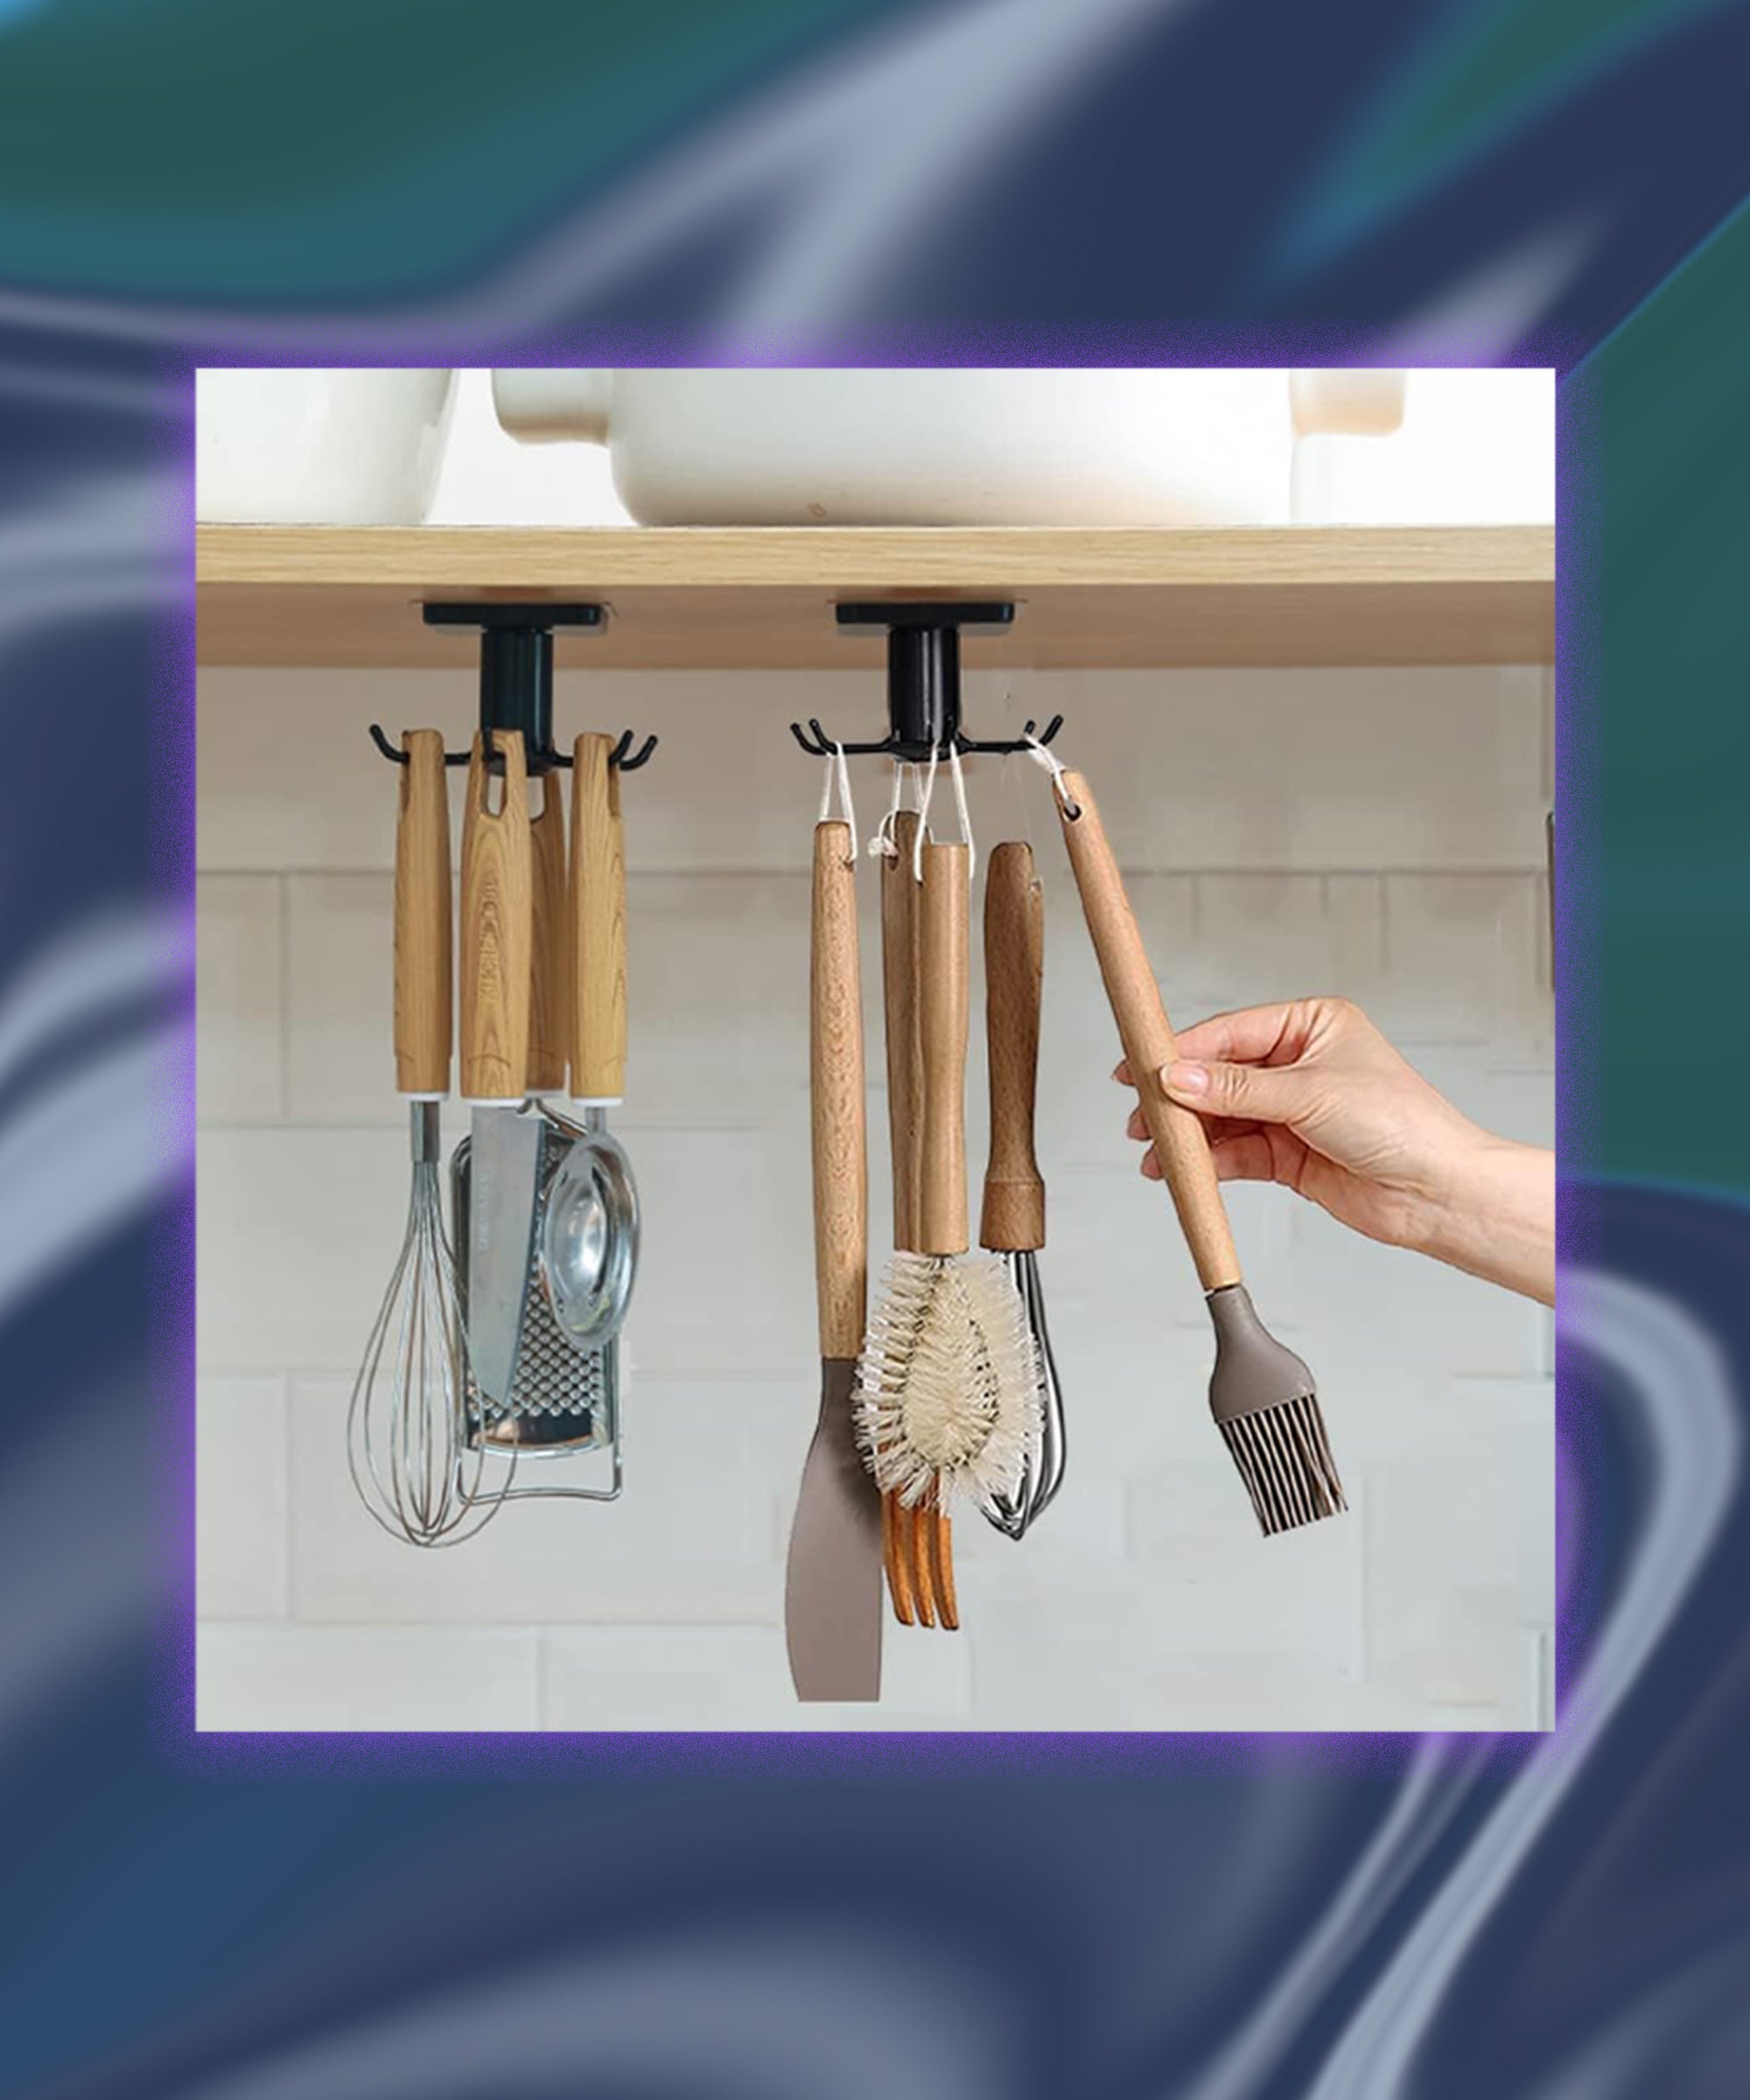 This Space-Saving Spice Rack and Paper Towel Holder Is Editor-Approved